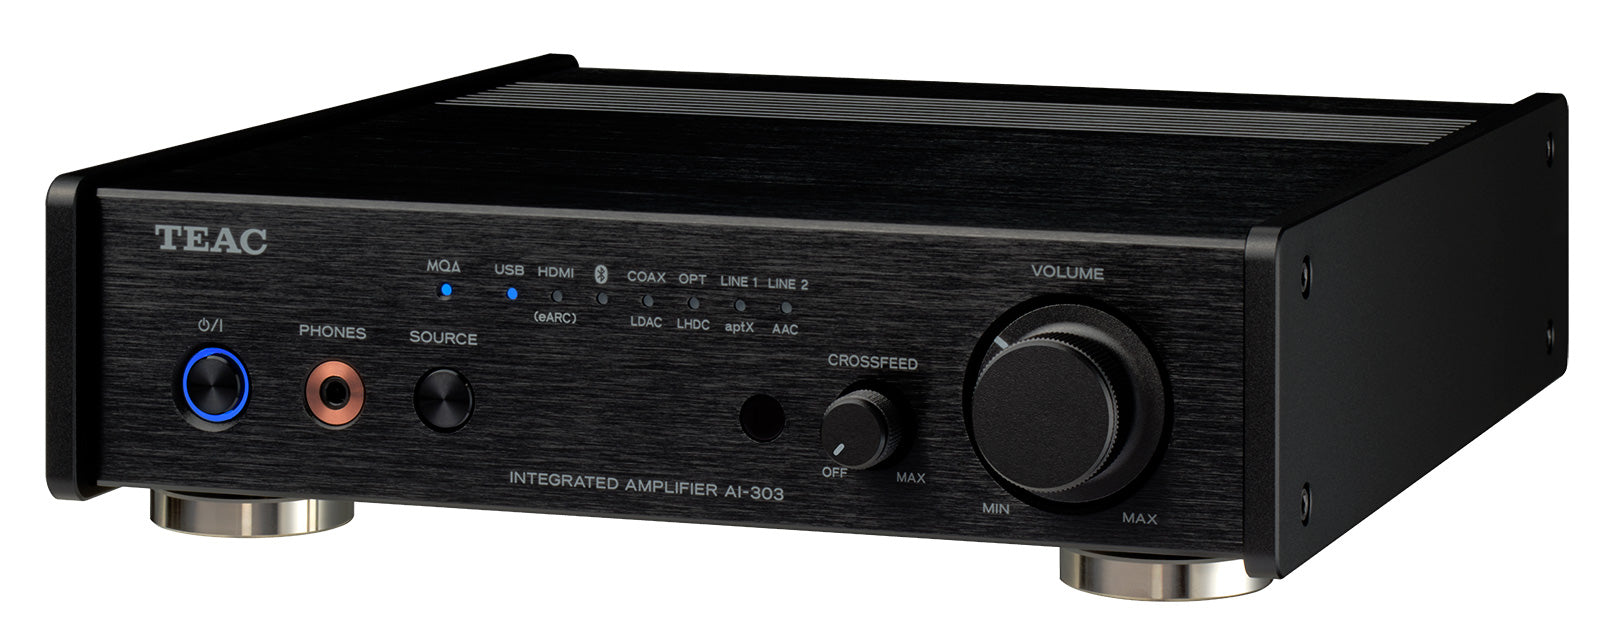 HQ Amplifier Safe Integrated DAC Black TEAC USB Sound — AI-303 and